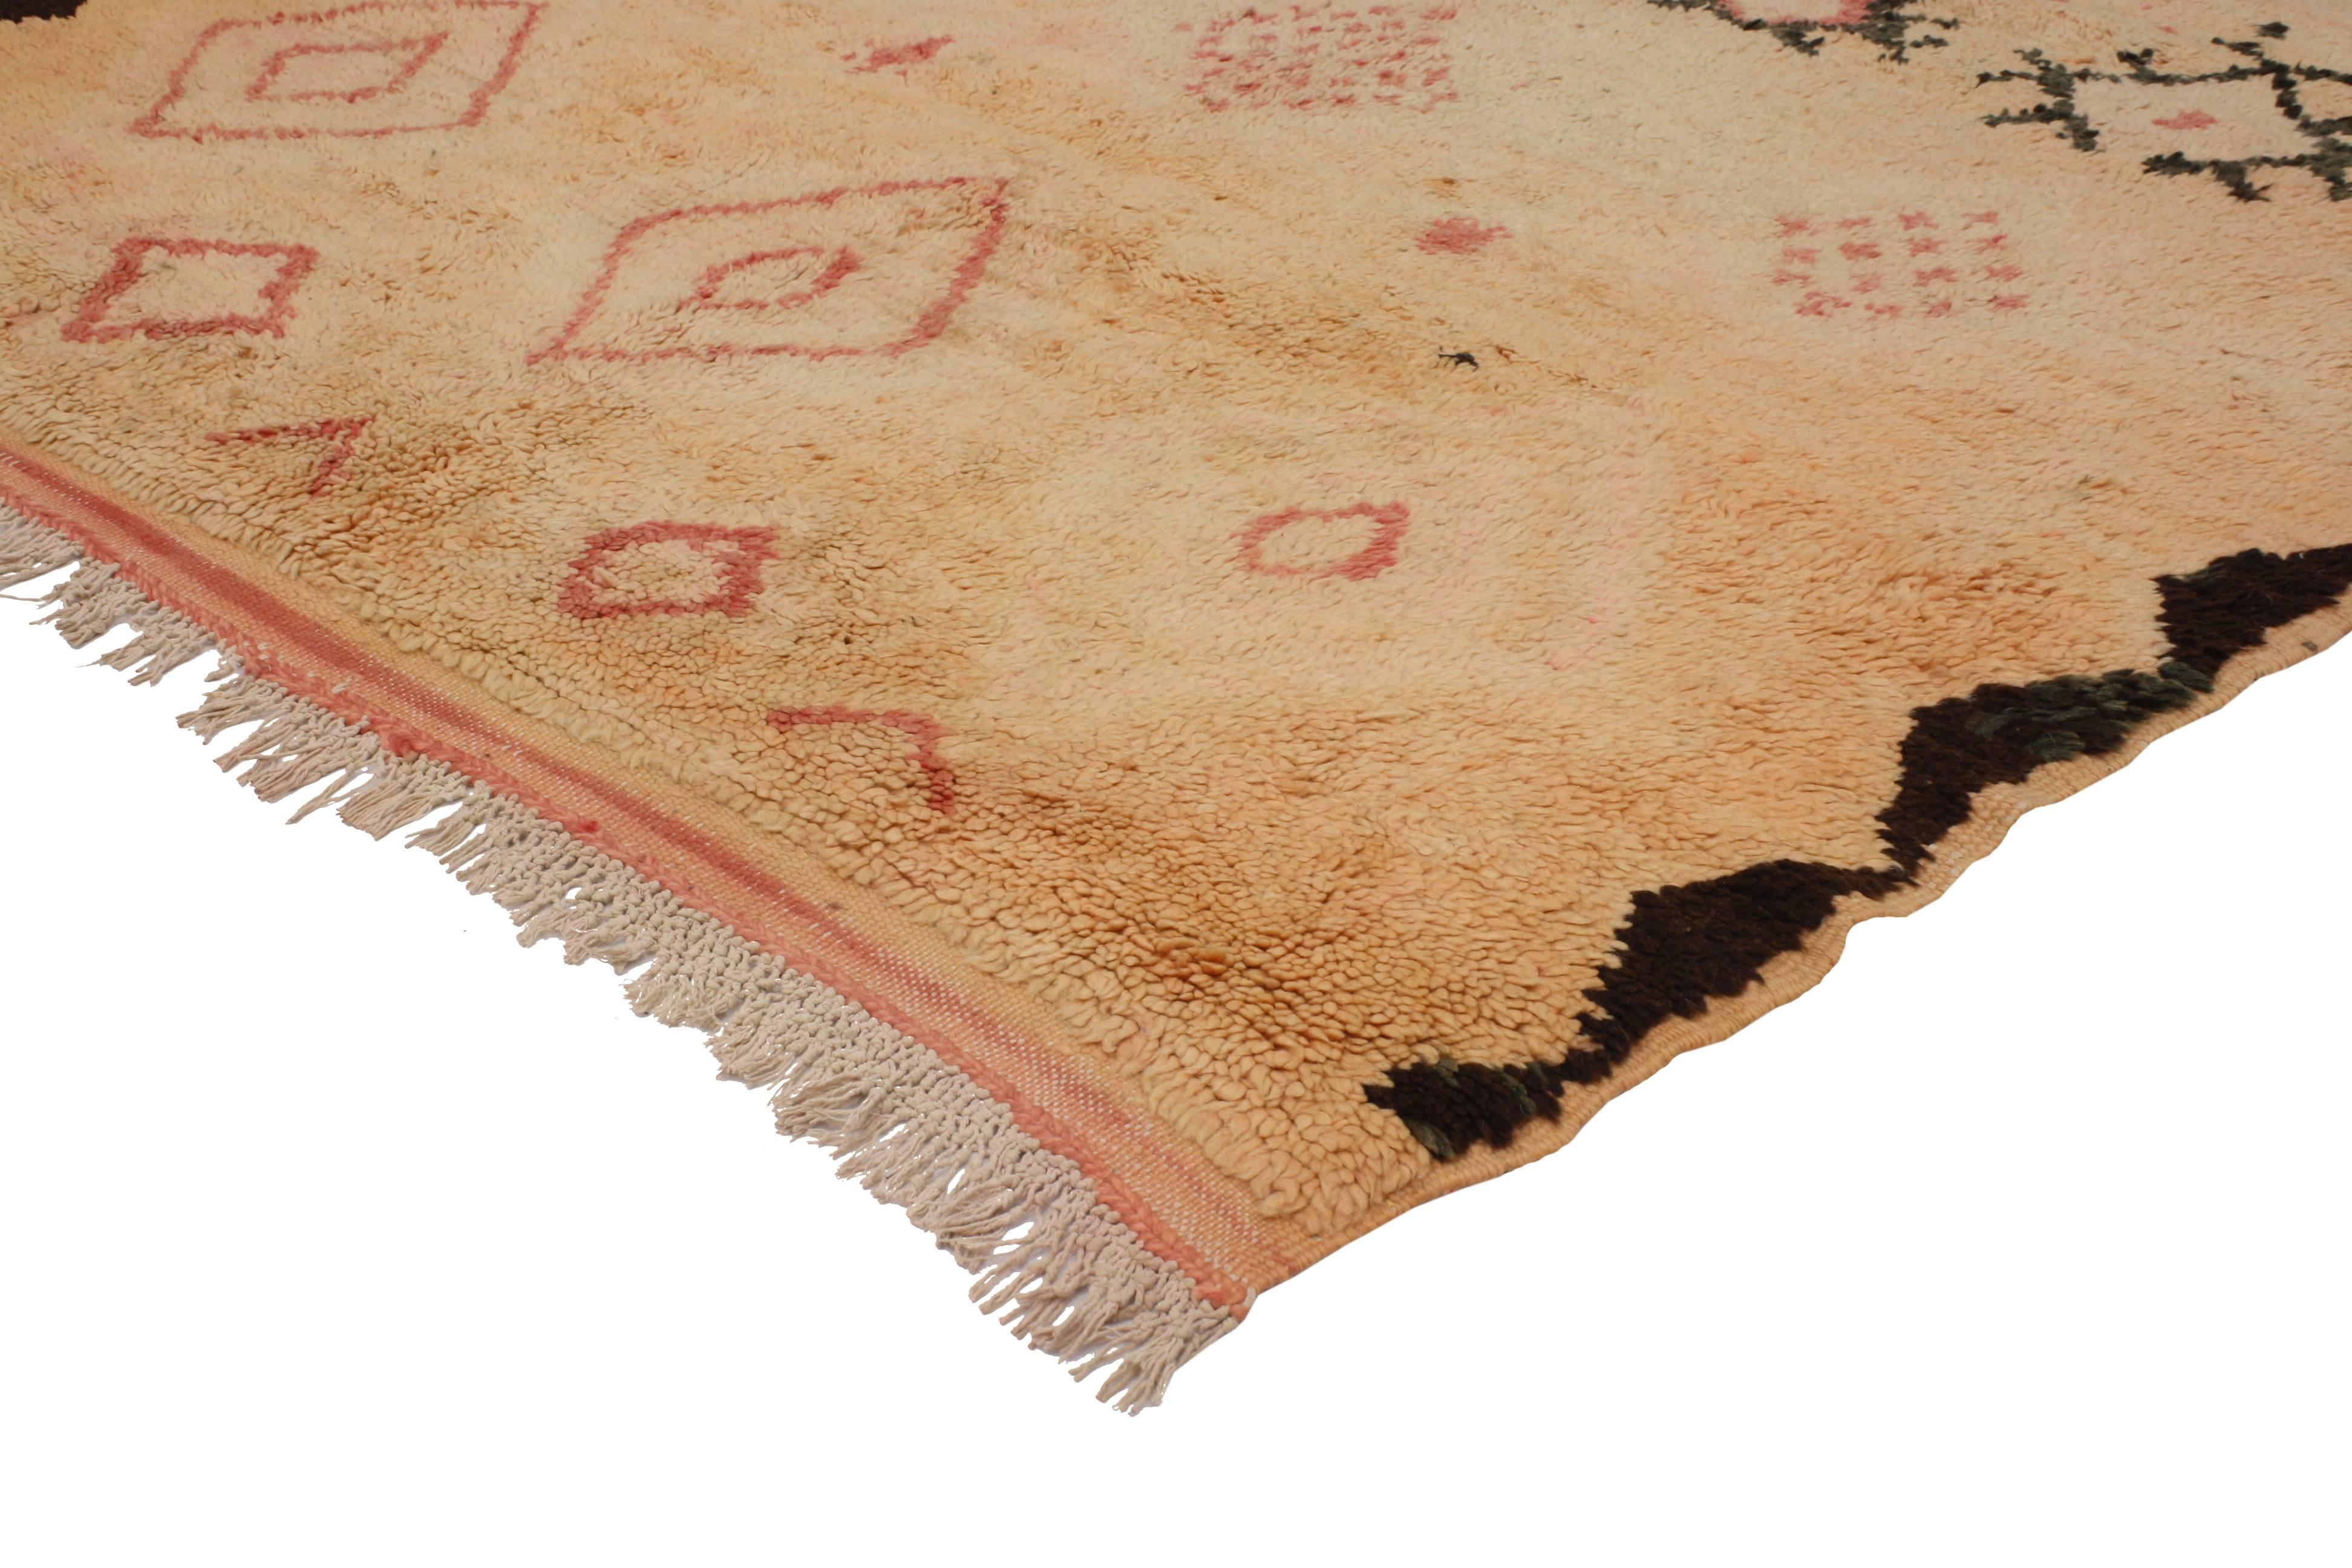 20395 Vintage Berber Moroccan Boujad Rug with Tribal Style and Soft Pastel Colors. Causal and calm or subtle Bohemian, this hand-knotted wool vintage Berber Moroccan Boujad rug features a beautiful sun-faded composition. It is heavily ornamented